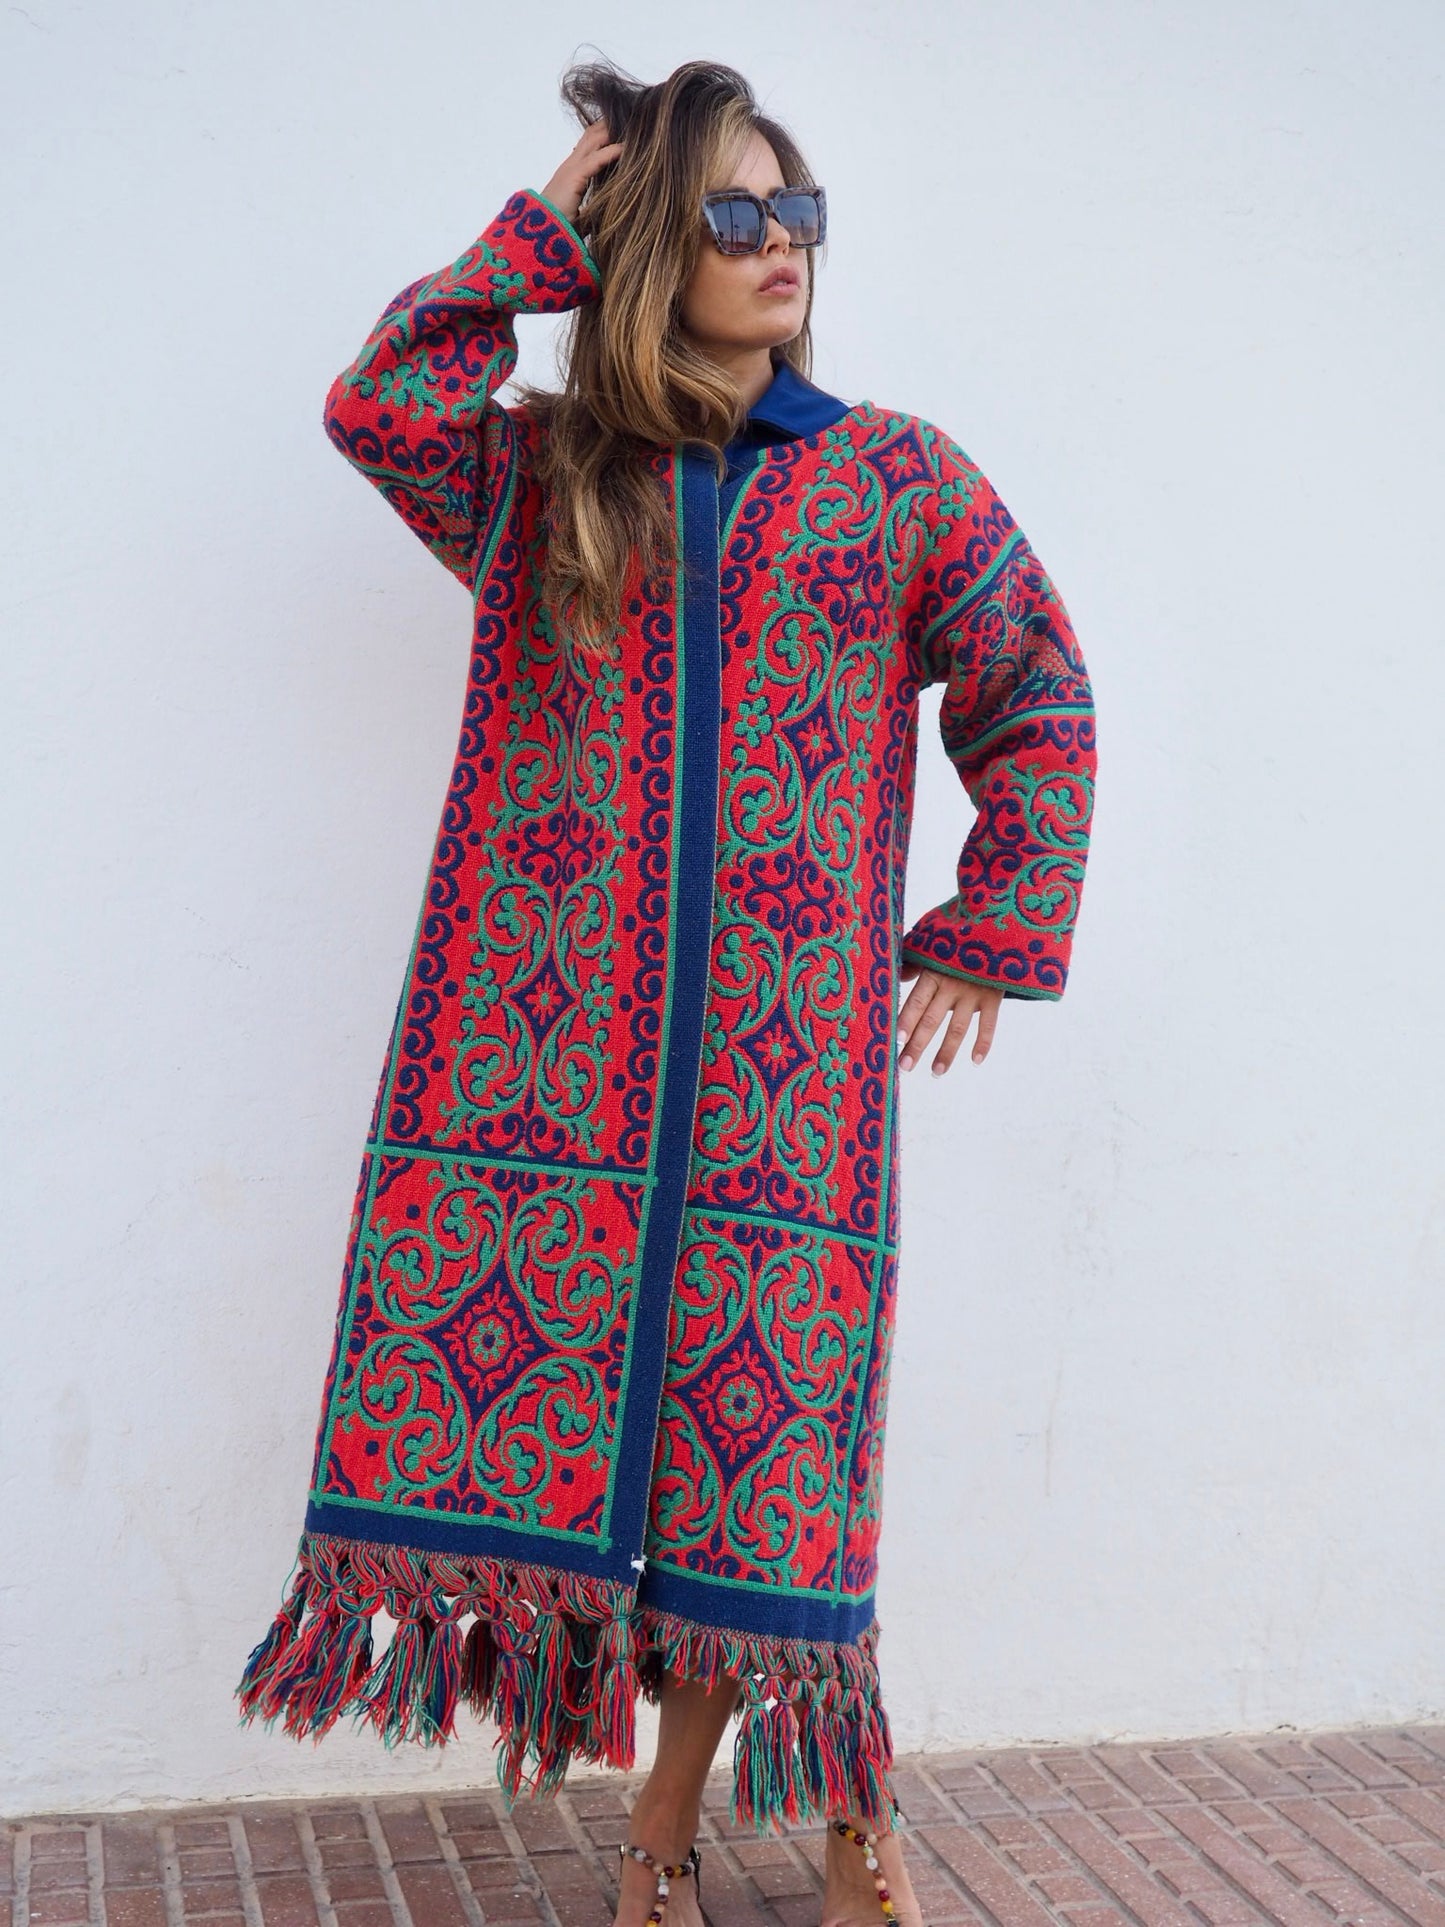 Amazing one off a kind woven tapestry jacket with oversize tassels trimming up-cycled jacket made by Vagabond Ibiza